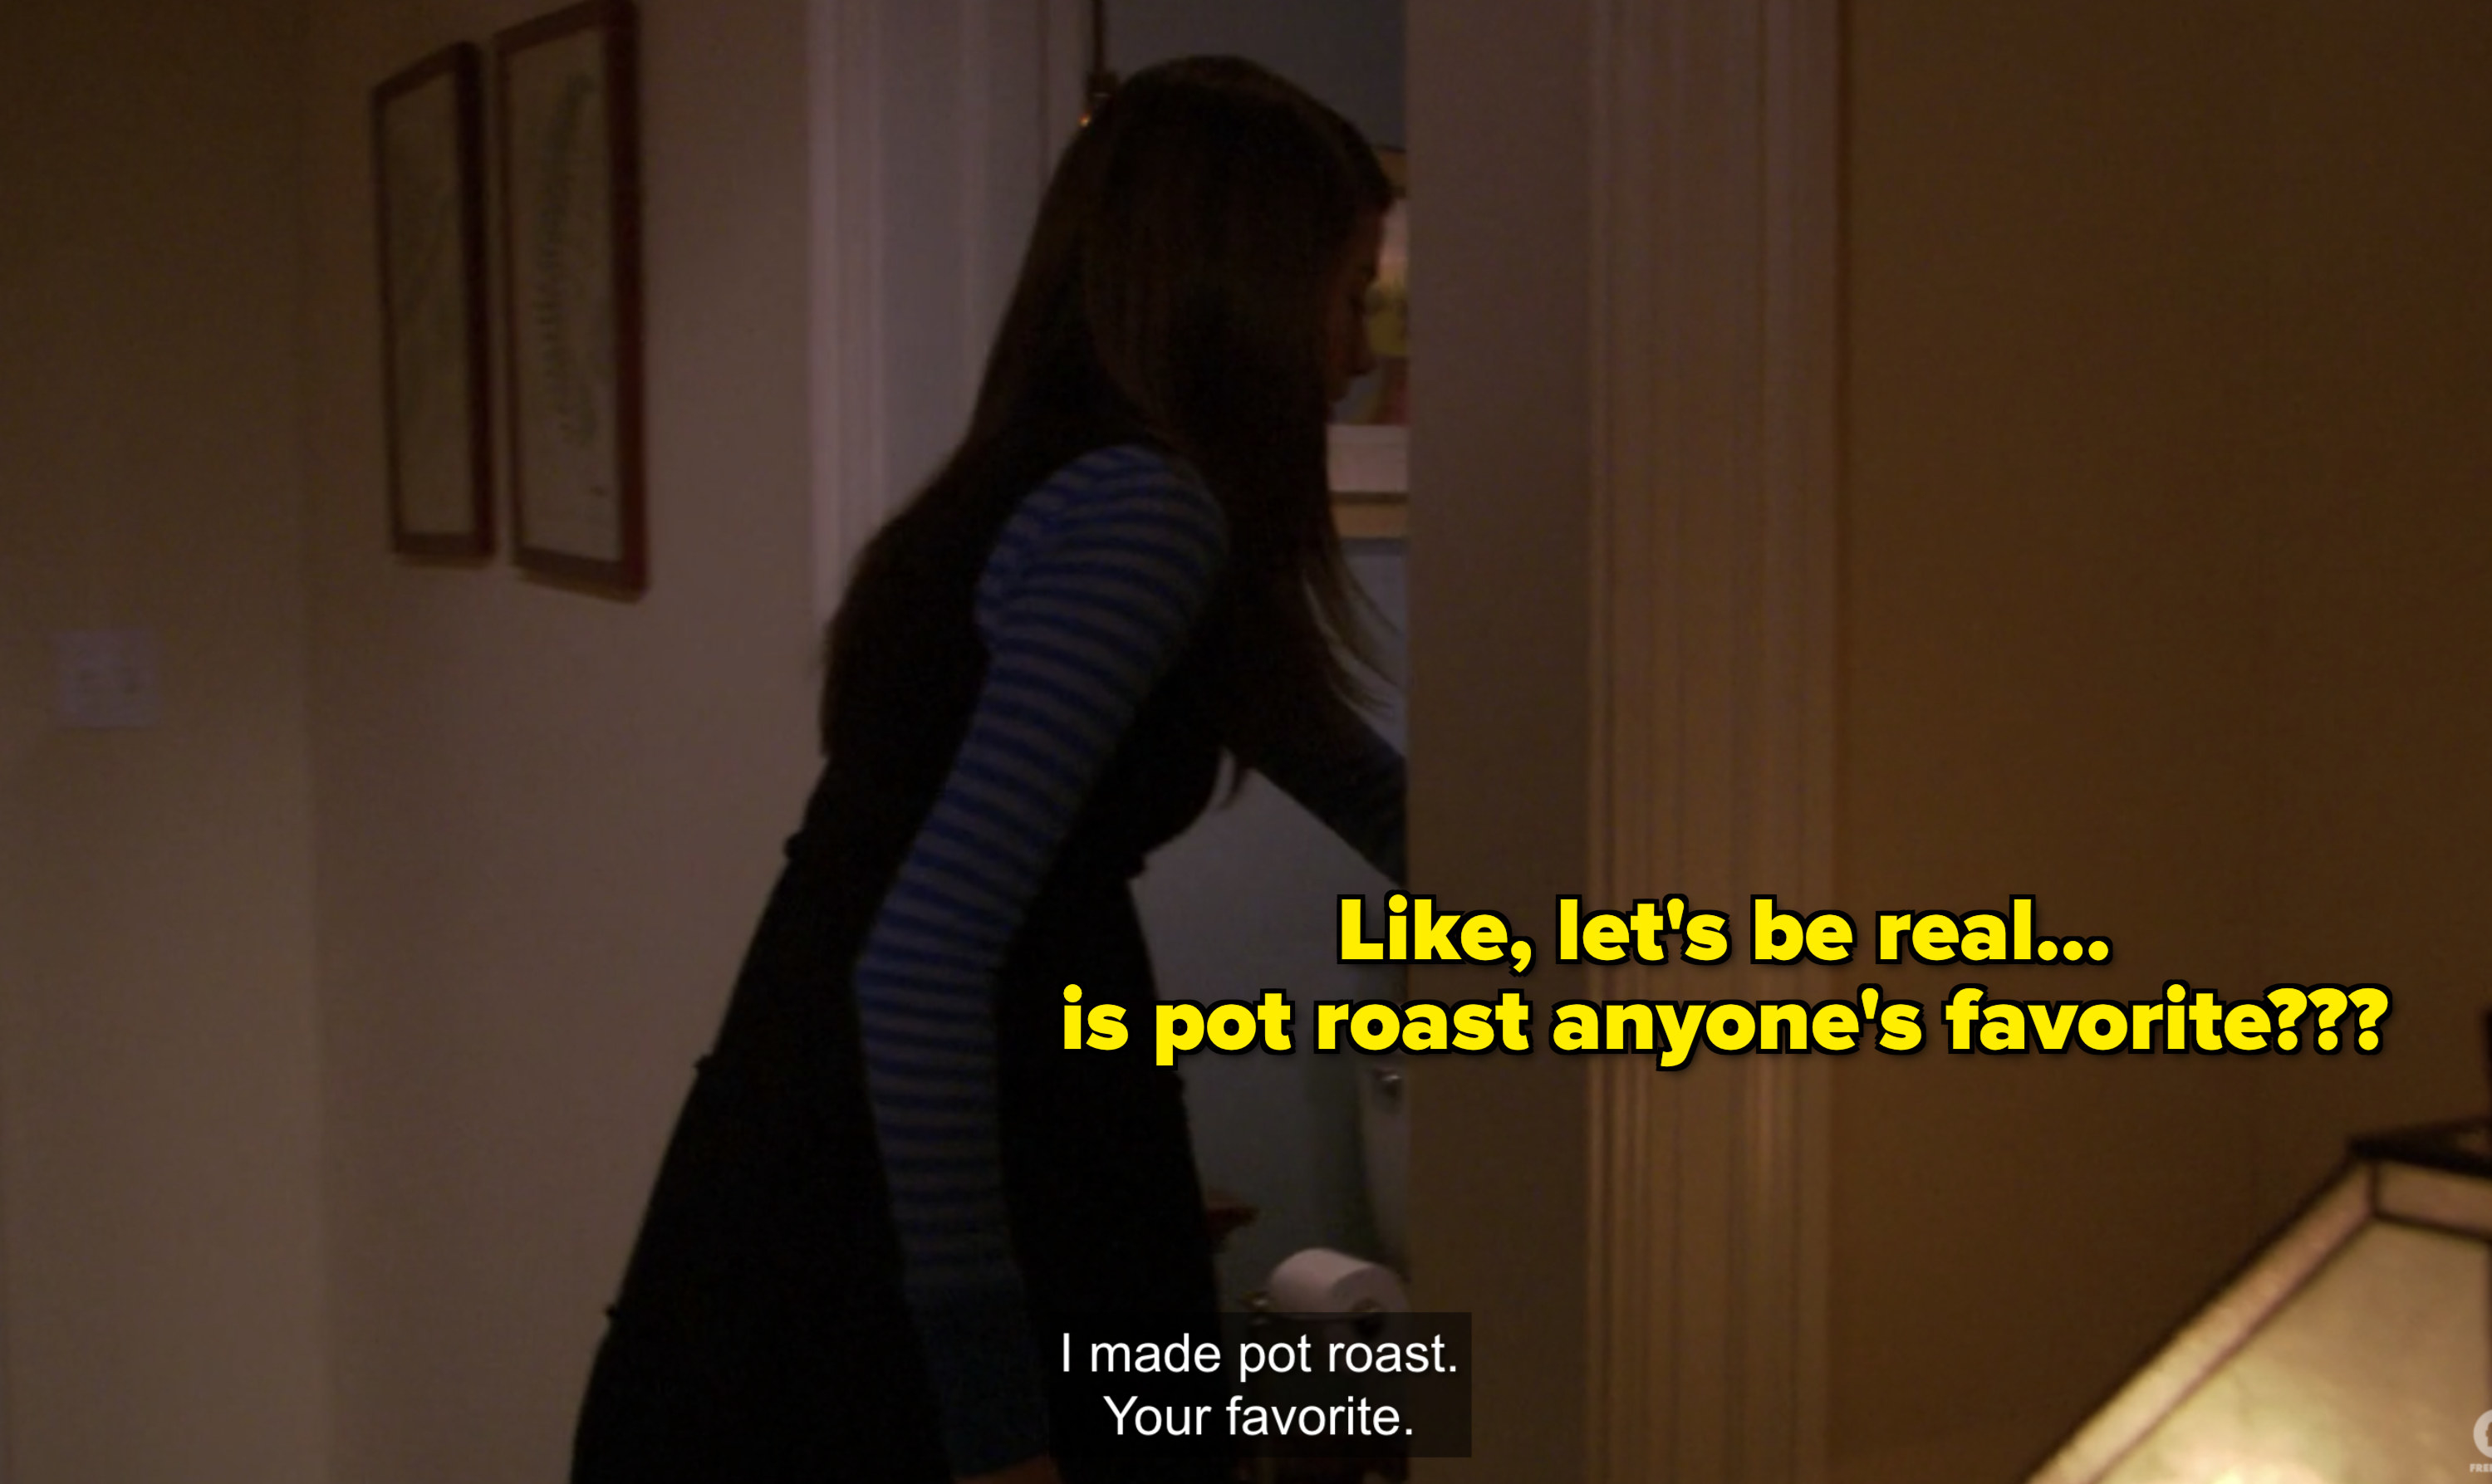 amy: &quot;like let&#x27;s be real is pot roast anyone&#x27;s favorite?&quot;